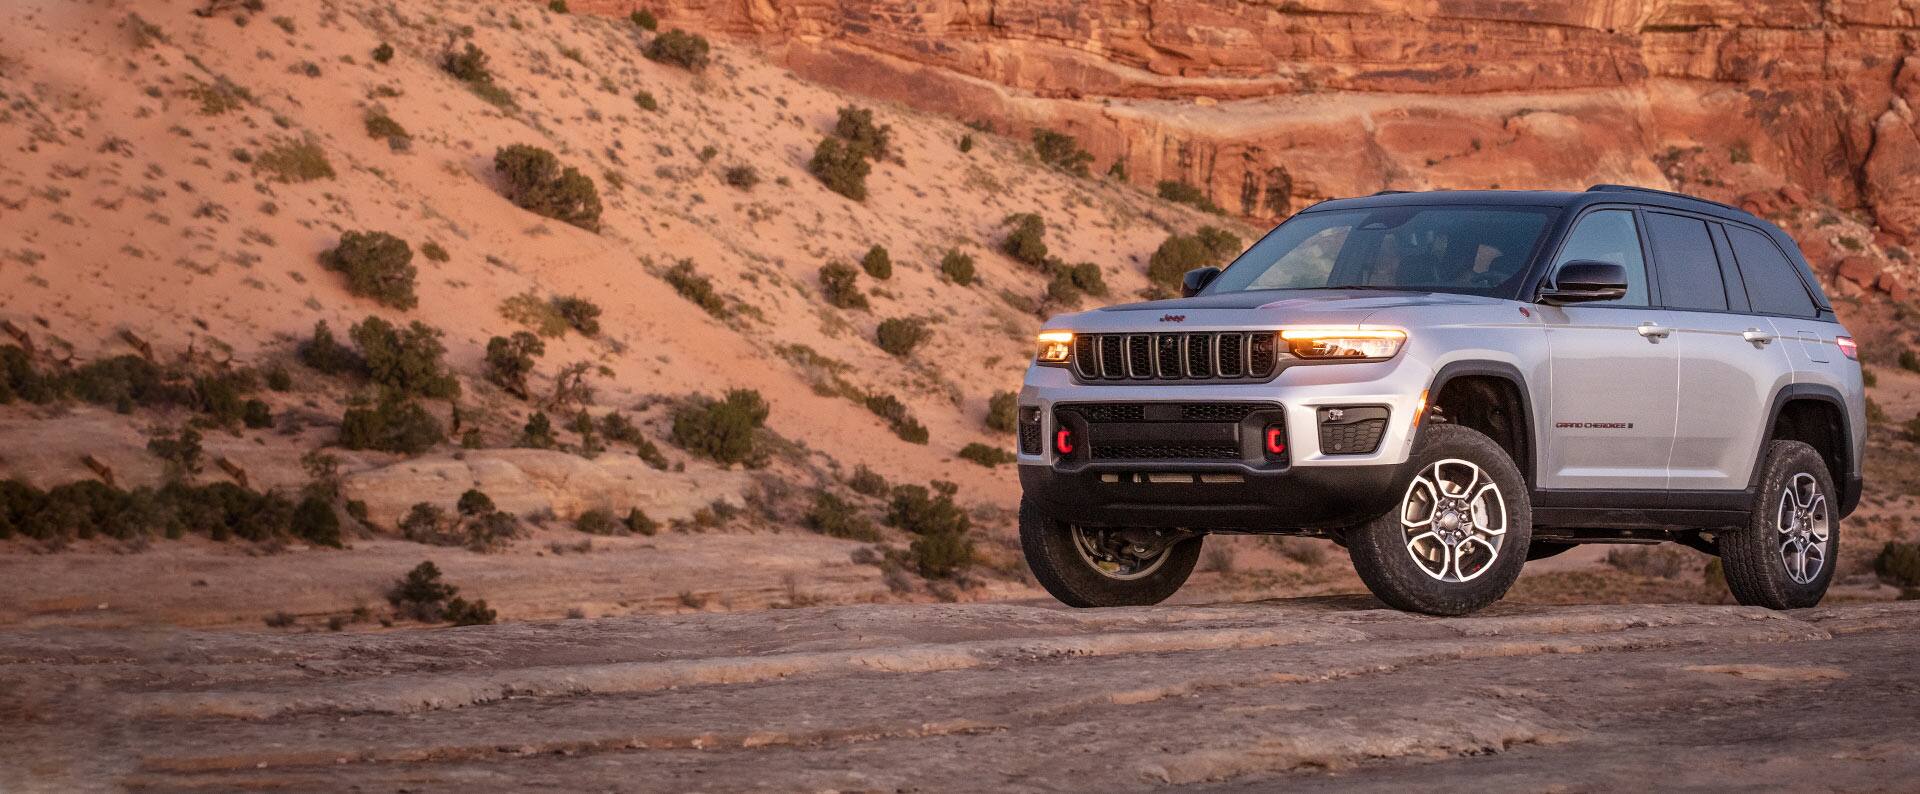 The 2022 Jeep Grand Cherokee Trailhawk parked on rocky ground that rises into a steep slope behind the vehicle.